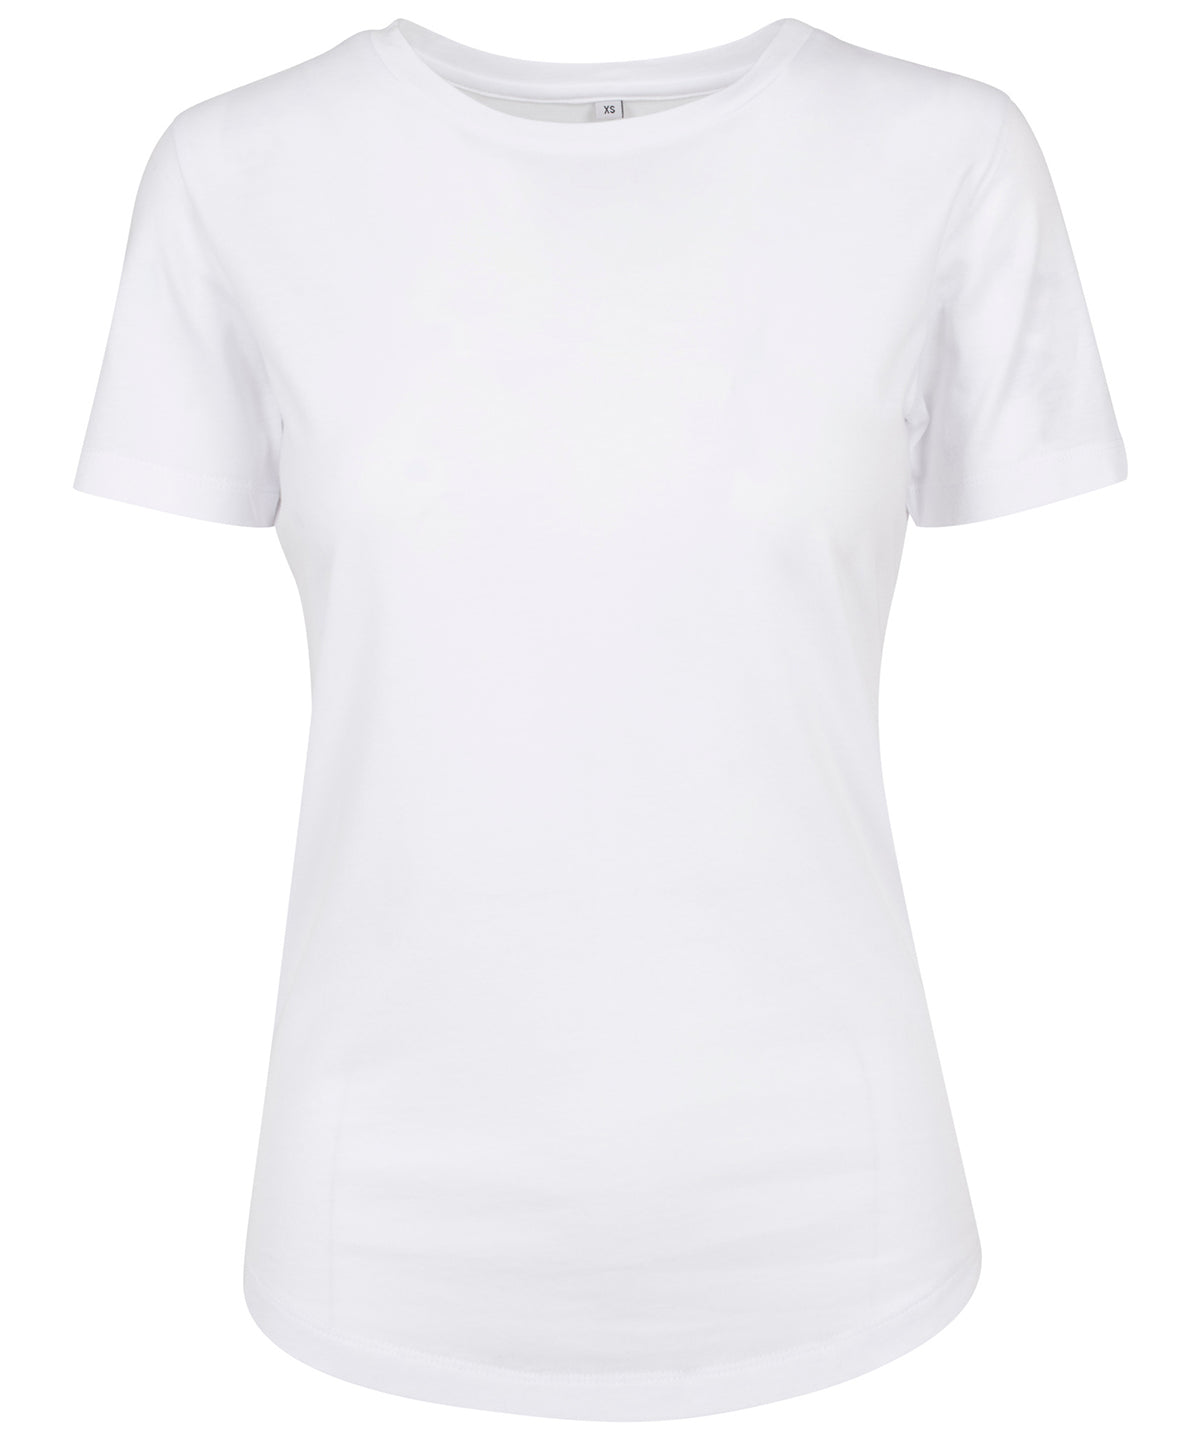 Build Your Brand Womens Fit Tee